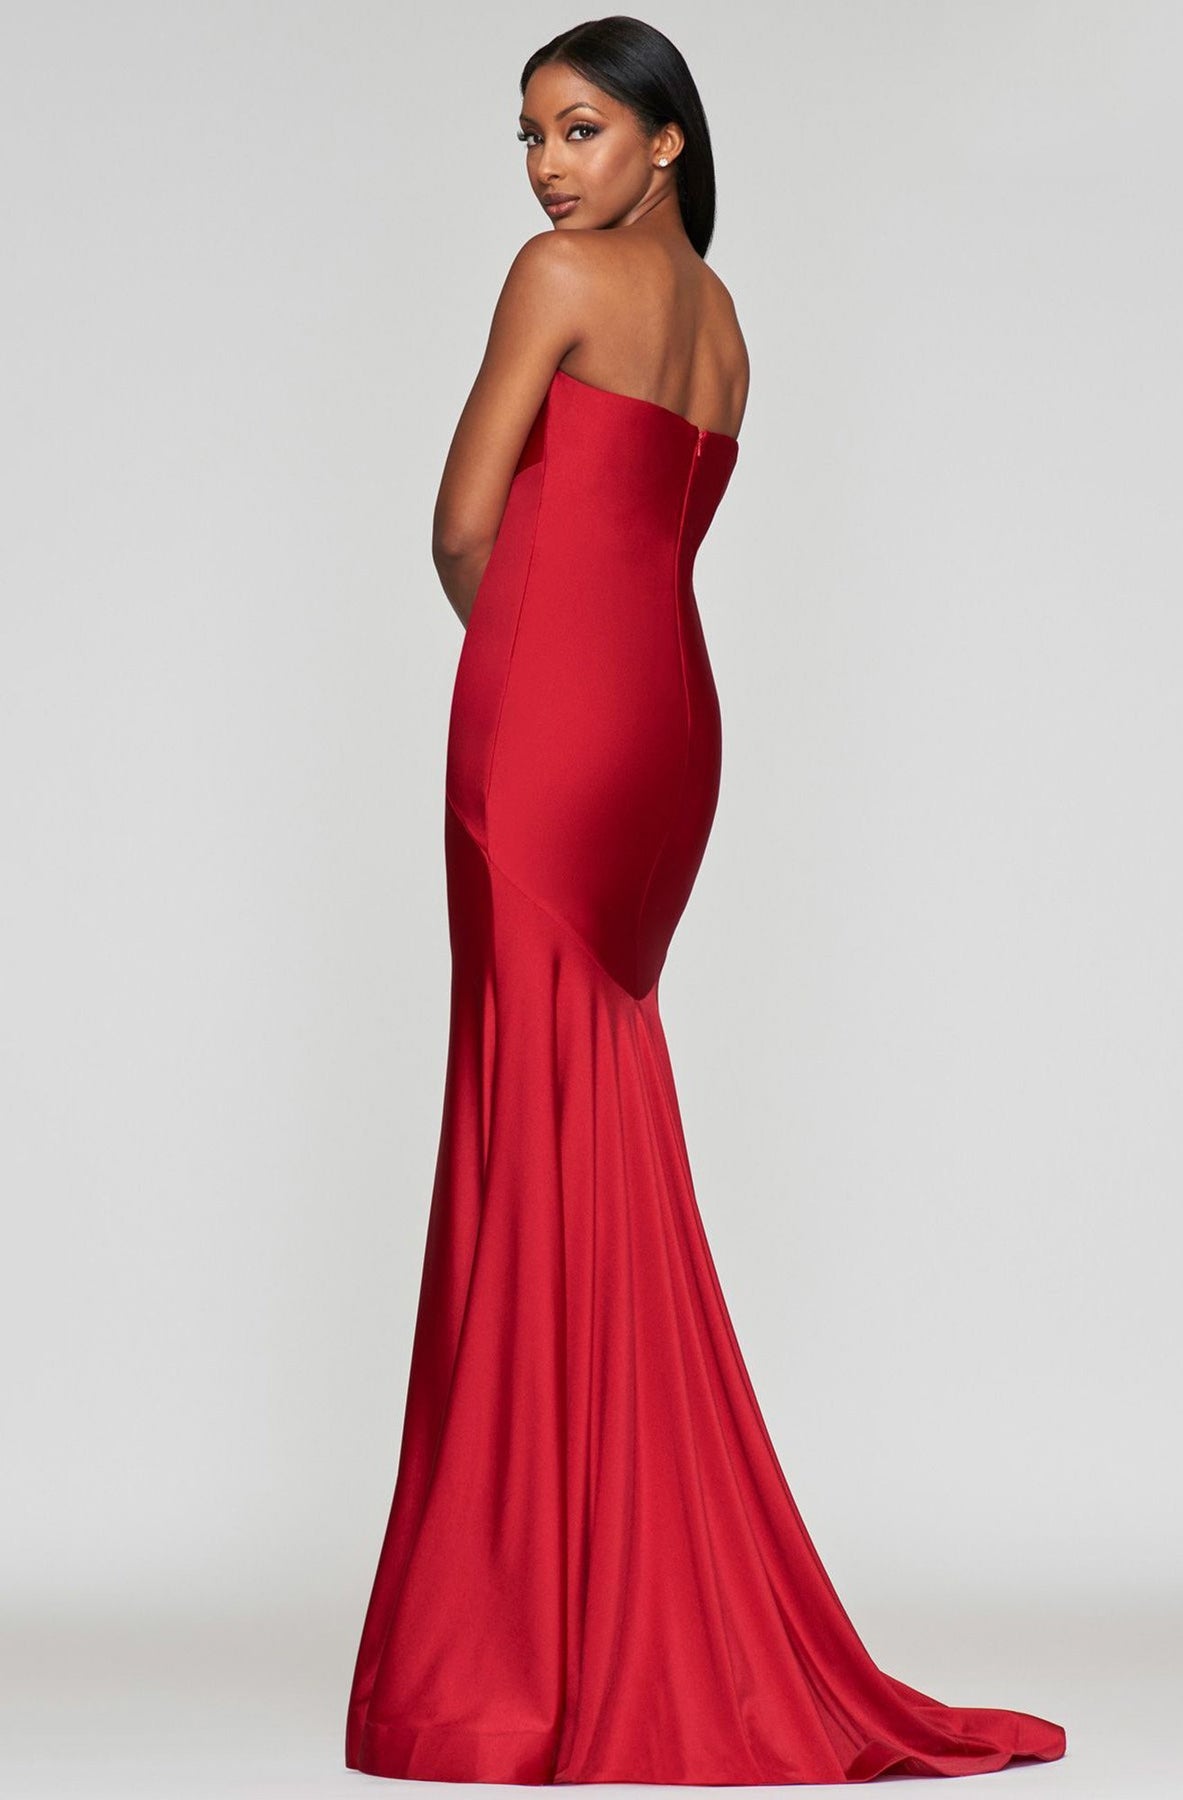 Faviana - Long Stretch Charmeuse Dress S10381 In Red